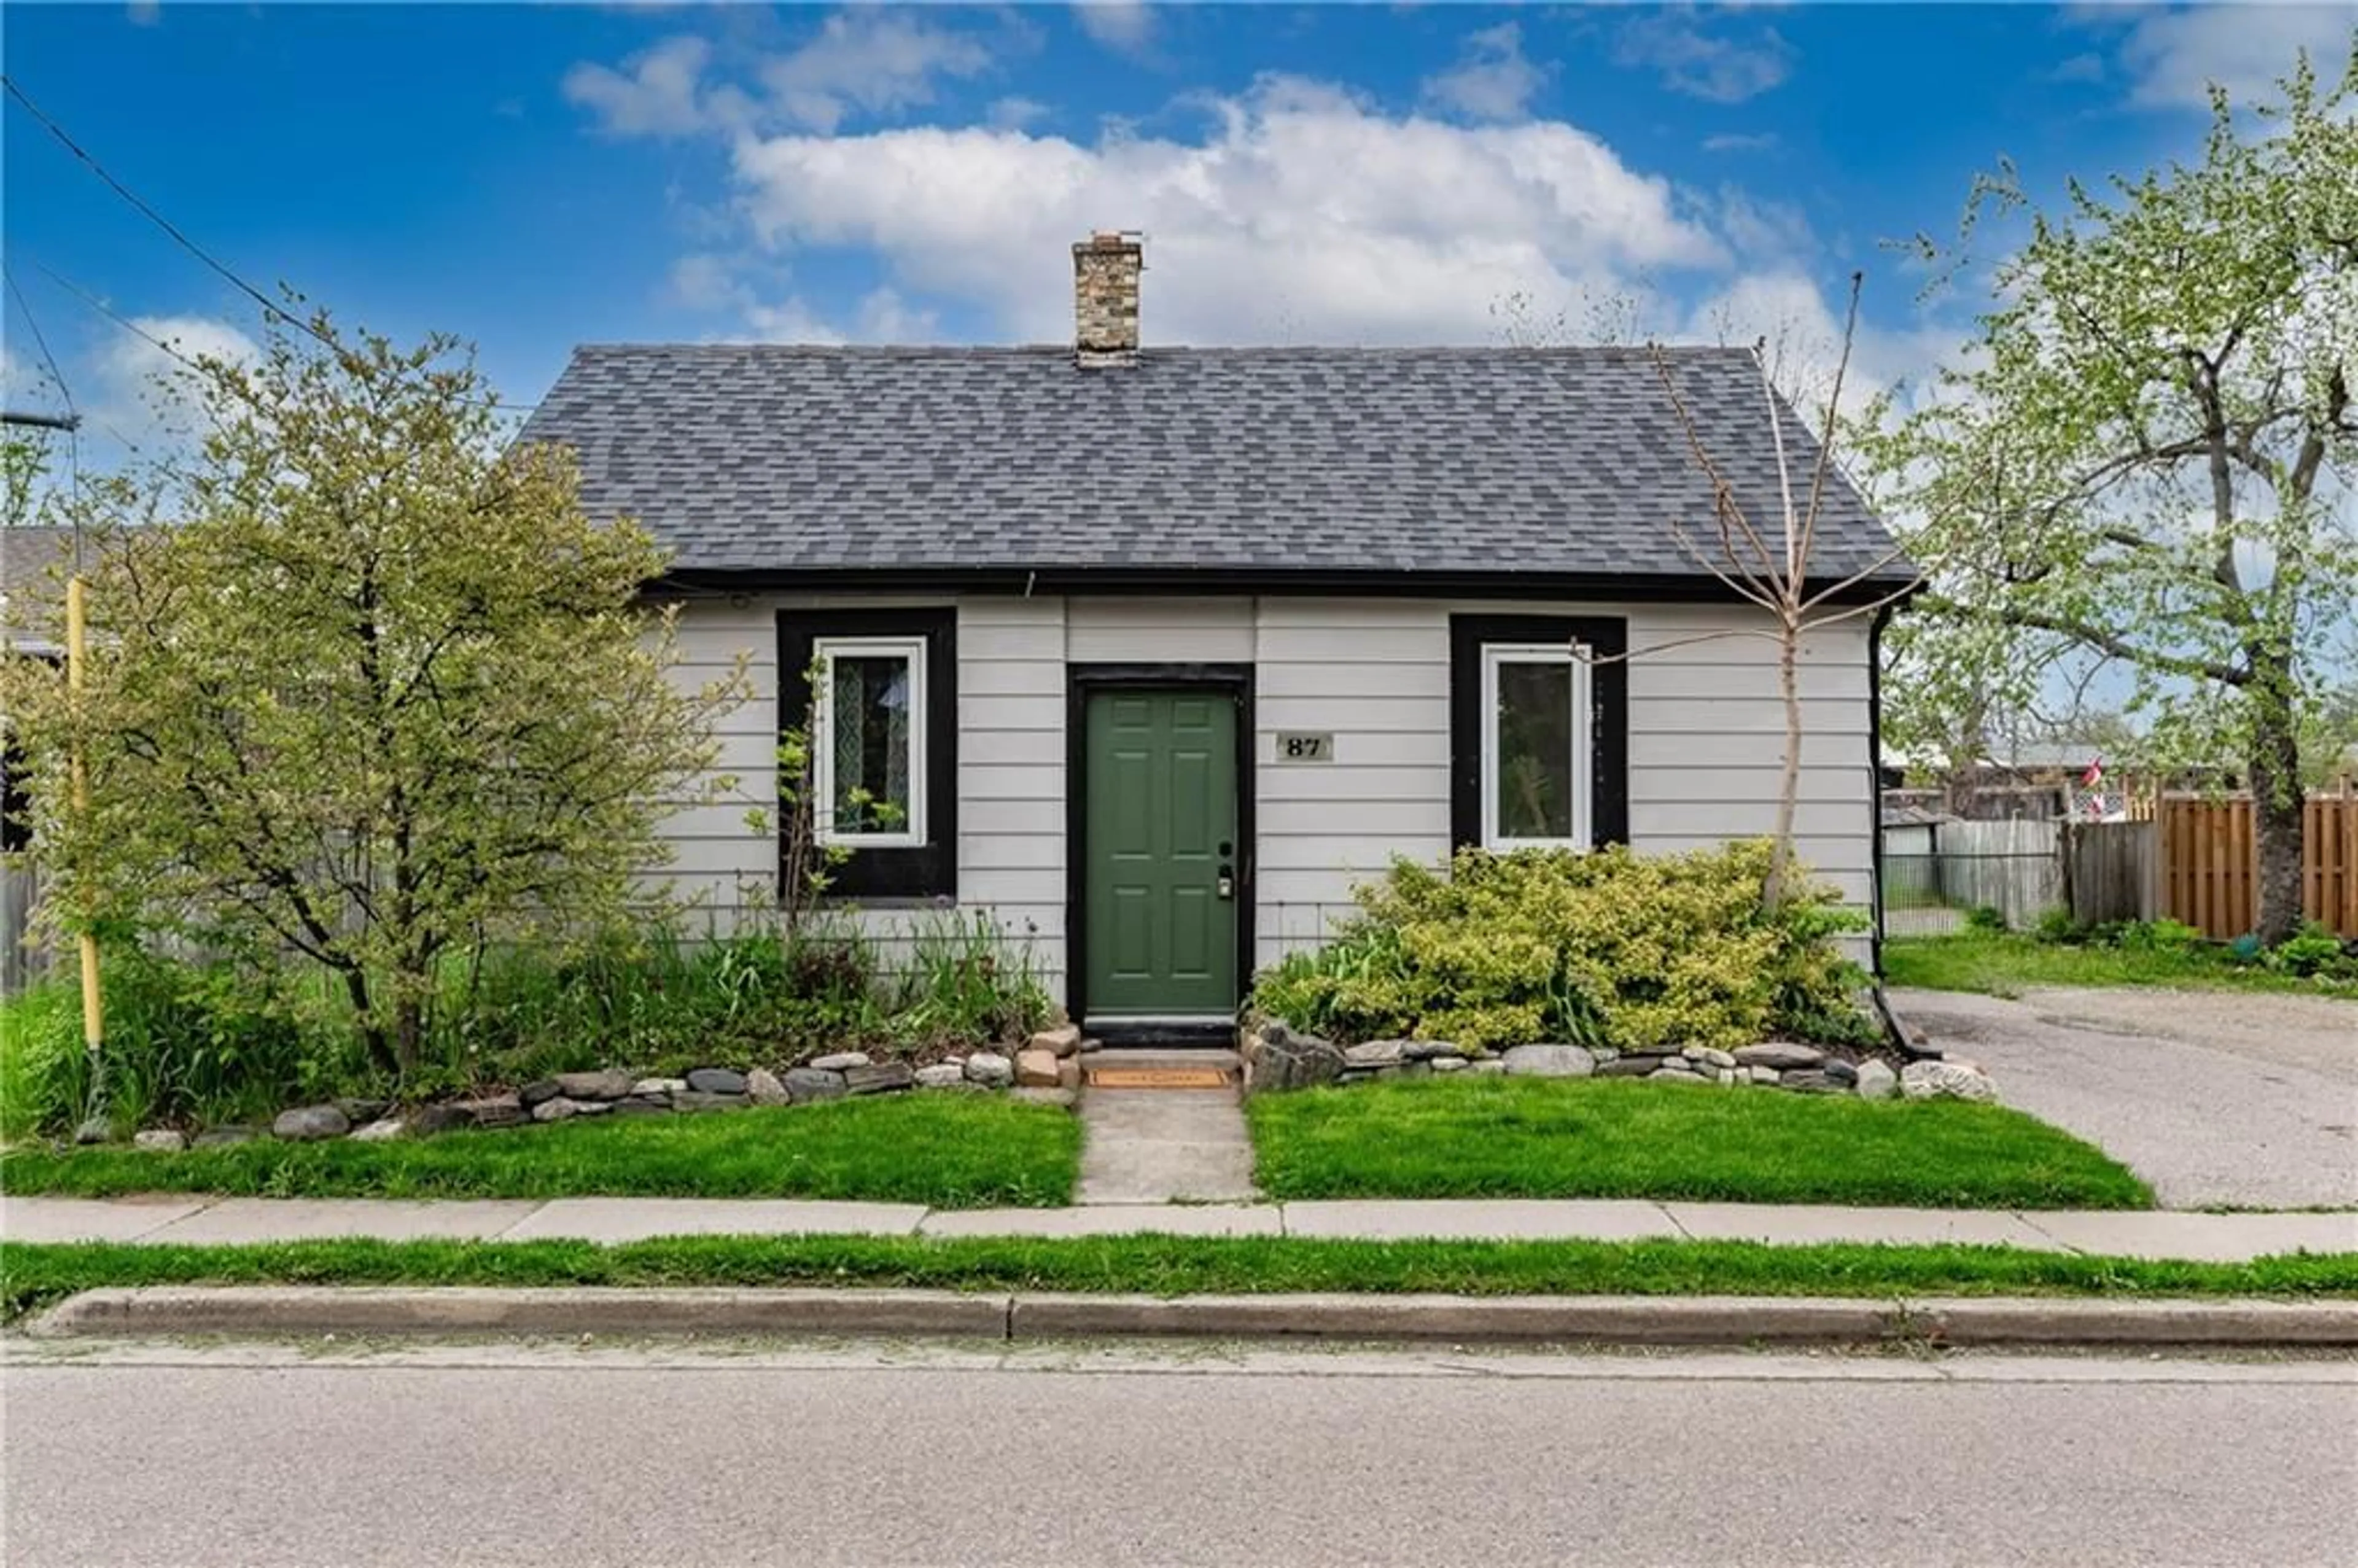 Cottage for 87 Inkerman St, Guelph Ontario N1H 3C6